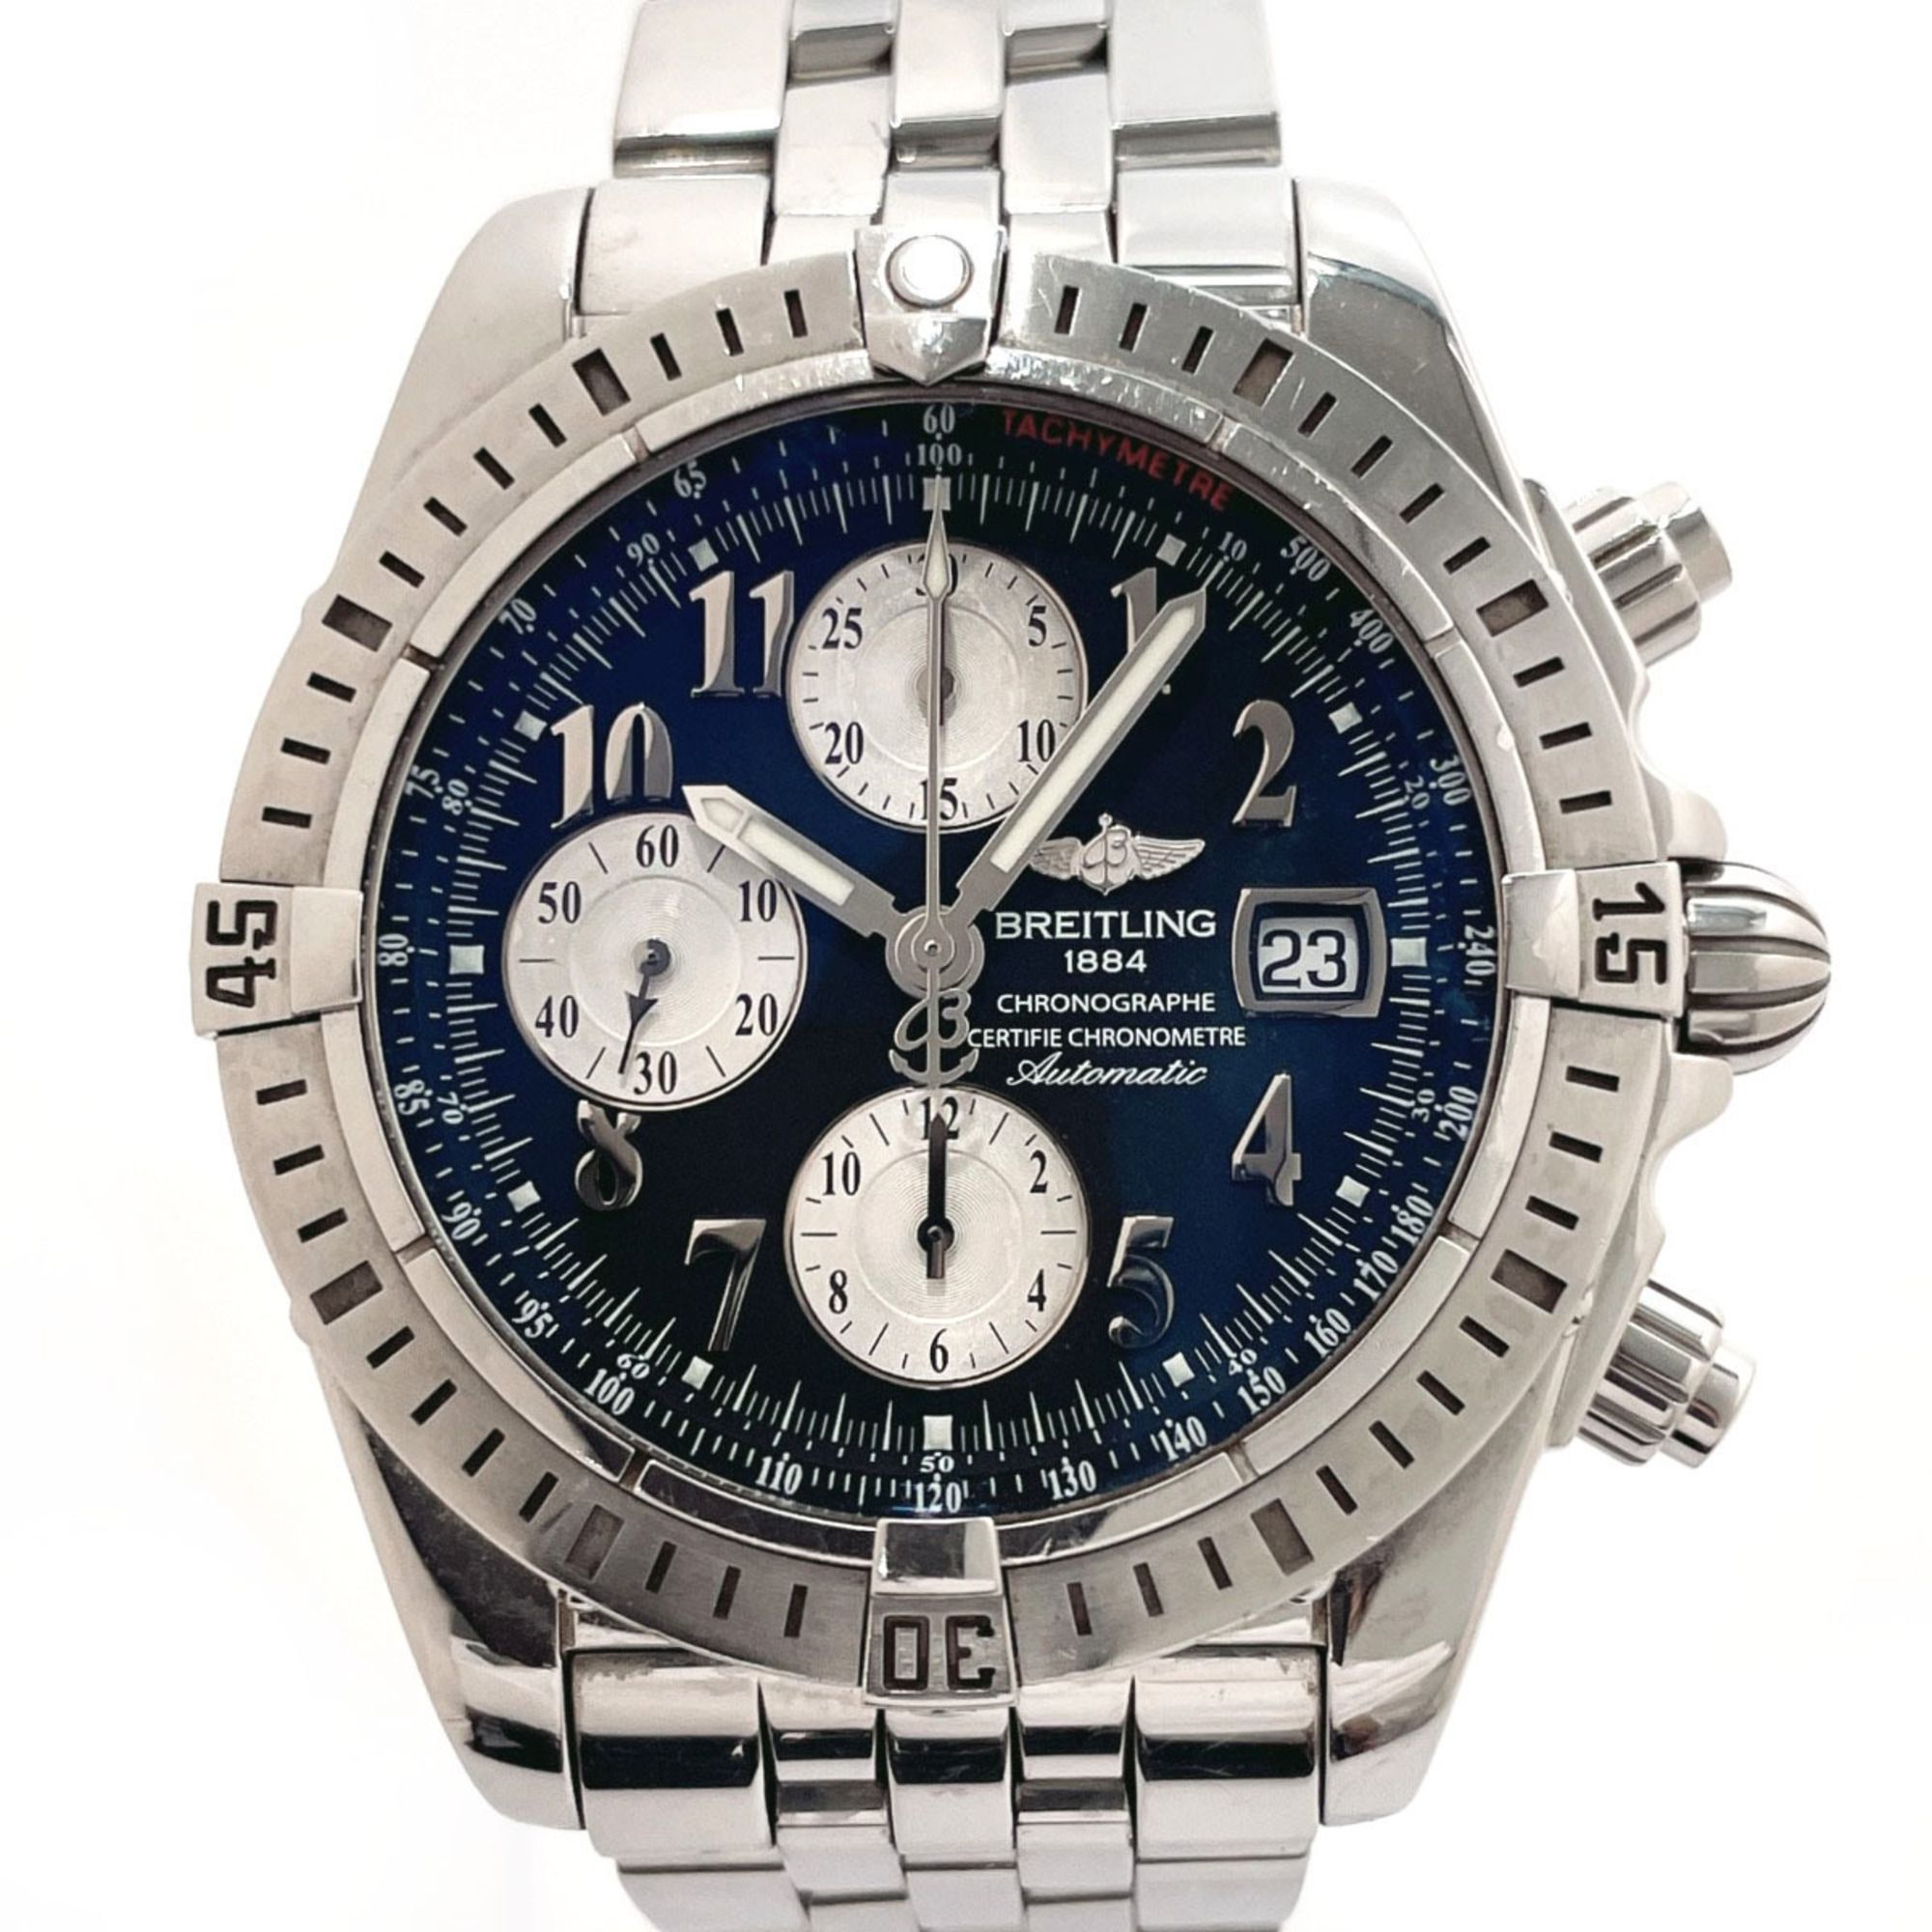 image of Breitling Chronomat Evolution Watch Stainless Steel Breitling A156B21Pa A13356 Men's Silver in Blac